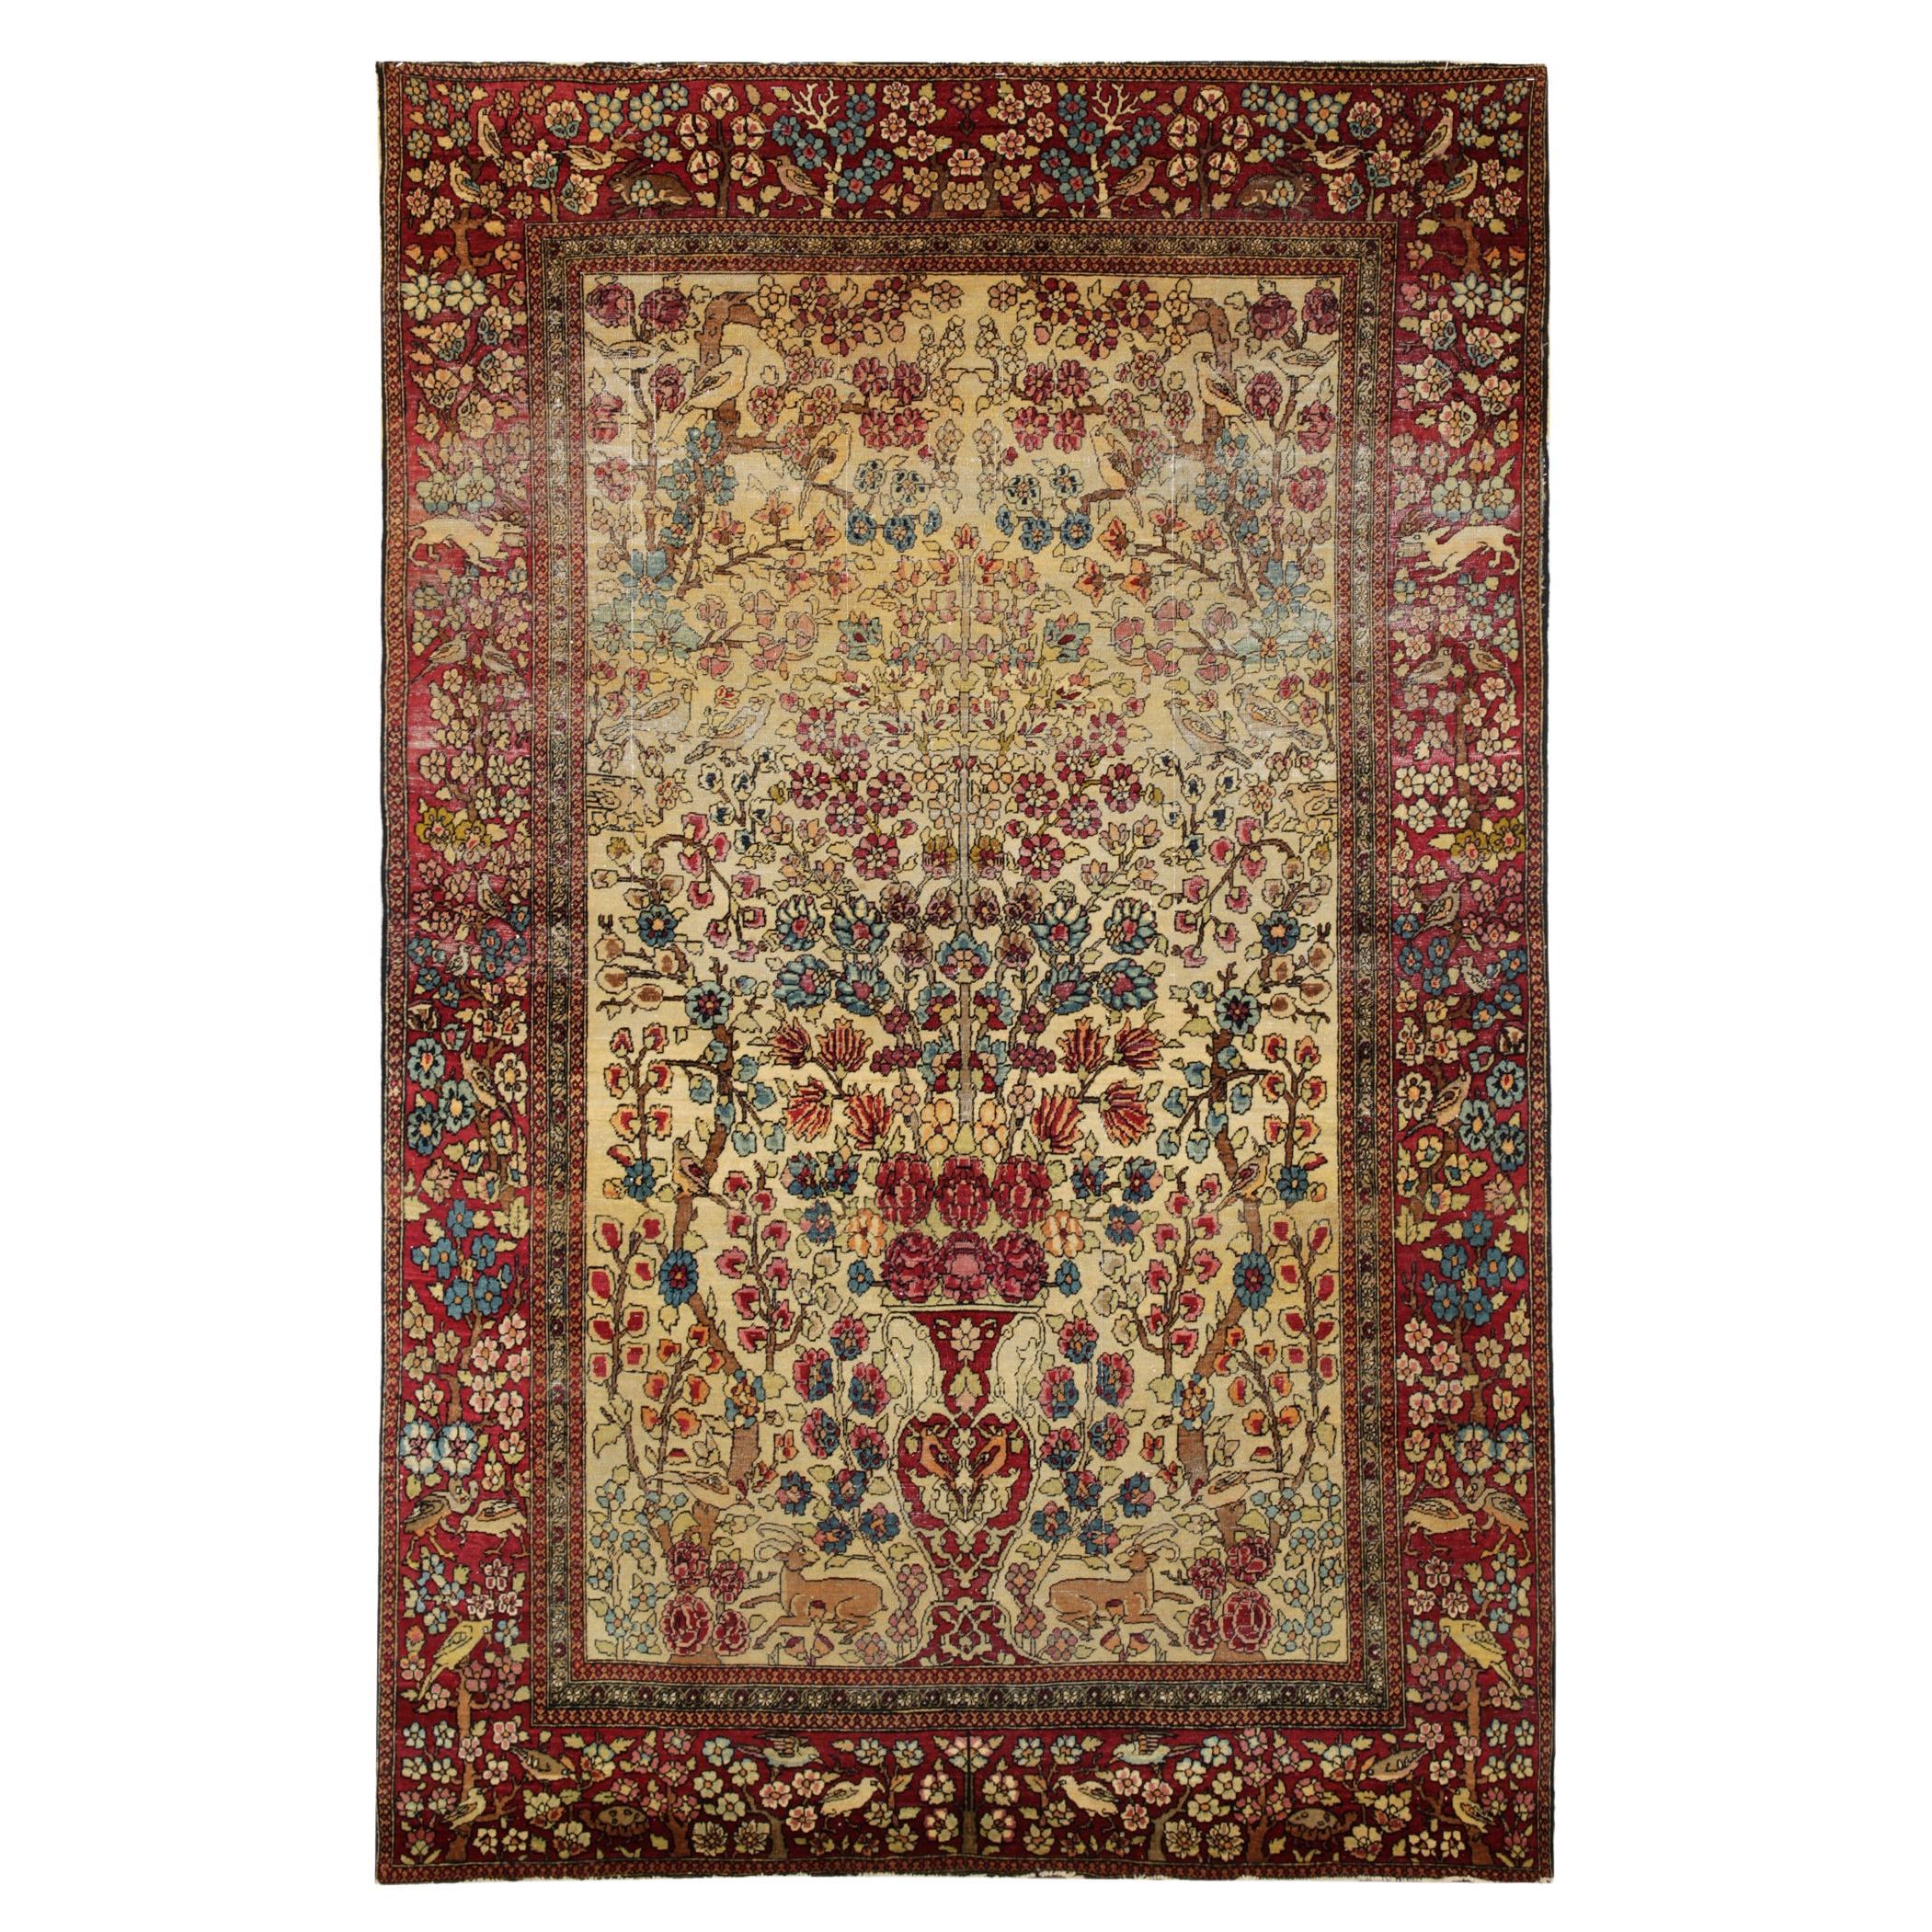 Antique Floral Wool Area Rug Handmade Exclusive Living Room Carpet- 125x197cm For Sale